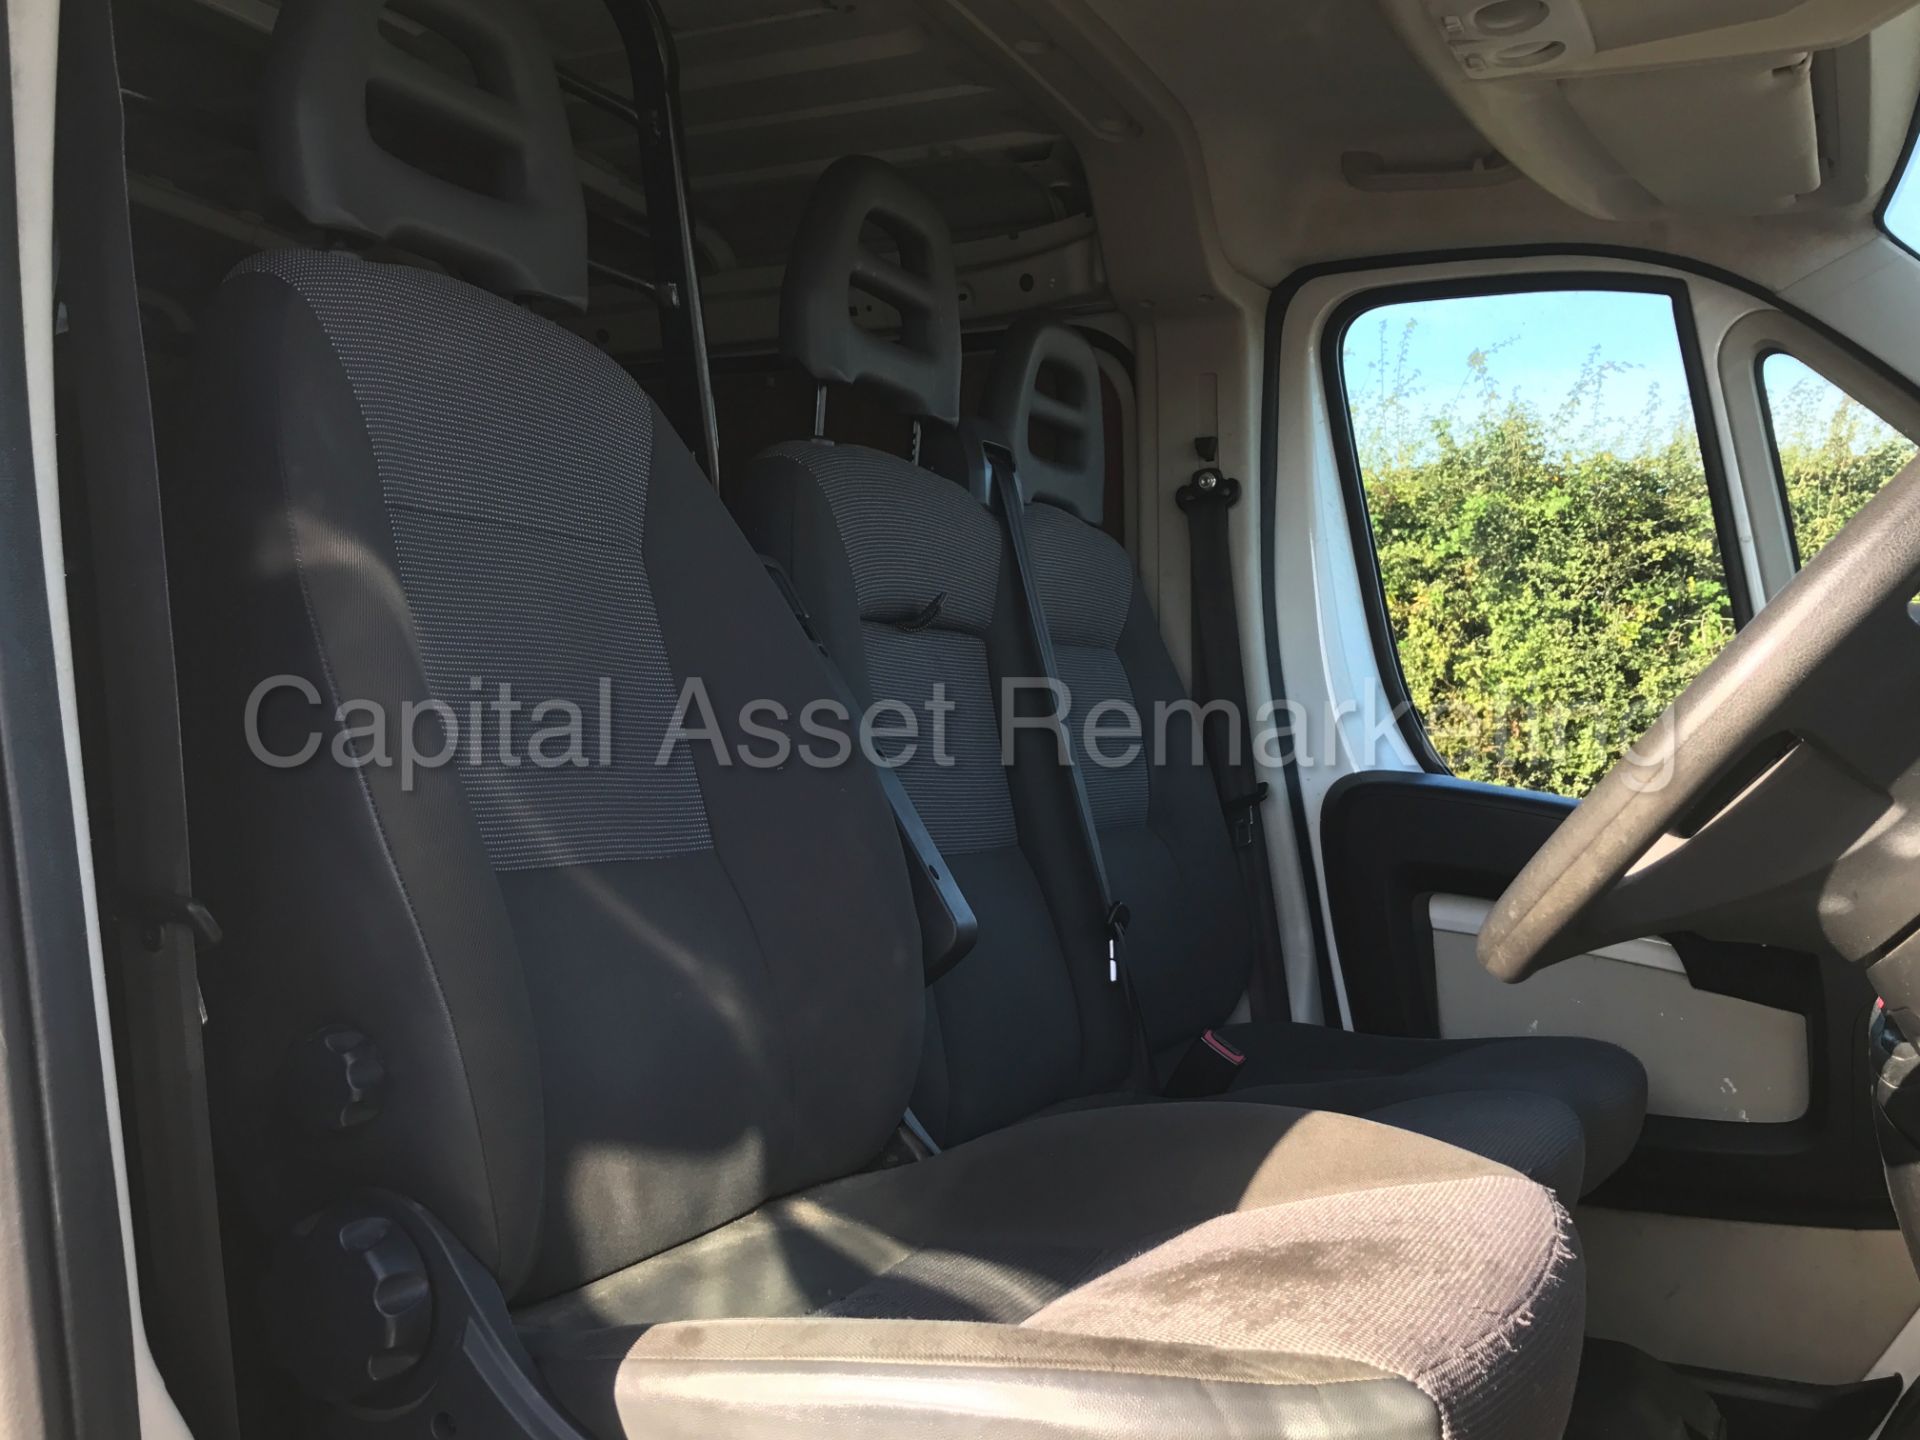 PEUGEOT BOXER 330 L1H1 (2013 - 13 REG) 'SWB - 2.2 HDI - 6 SPEED' (1 OWNER FROM NEW) **LOW MILES** - Image 16 of 19